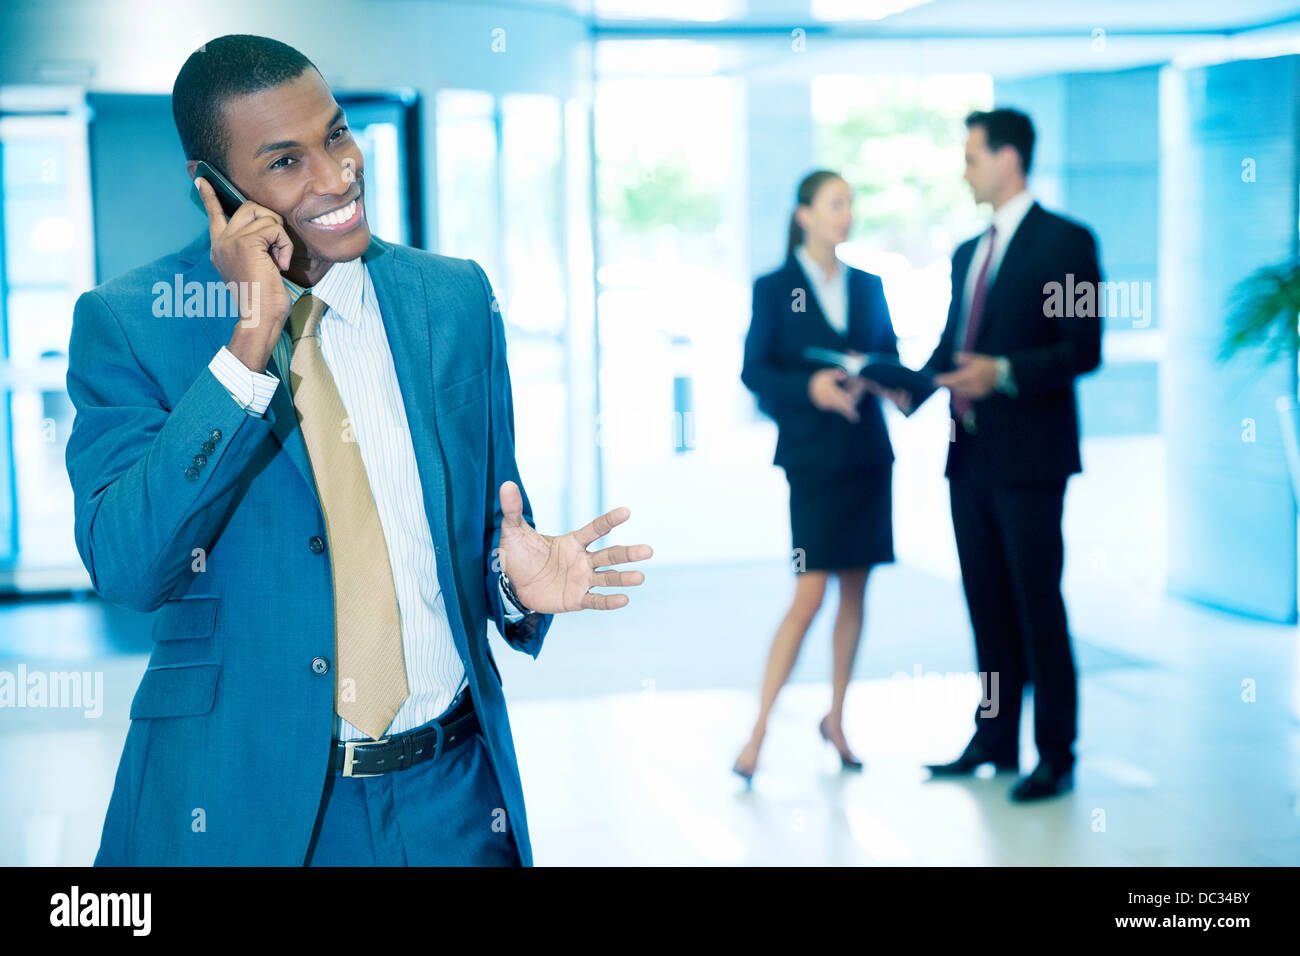 Smiling businessman talking on cell phone and gesturing in lobby Banque D'Images